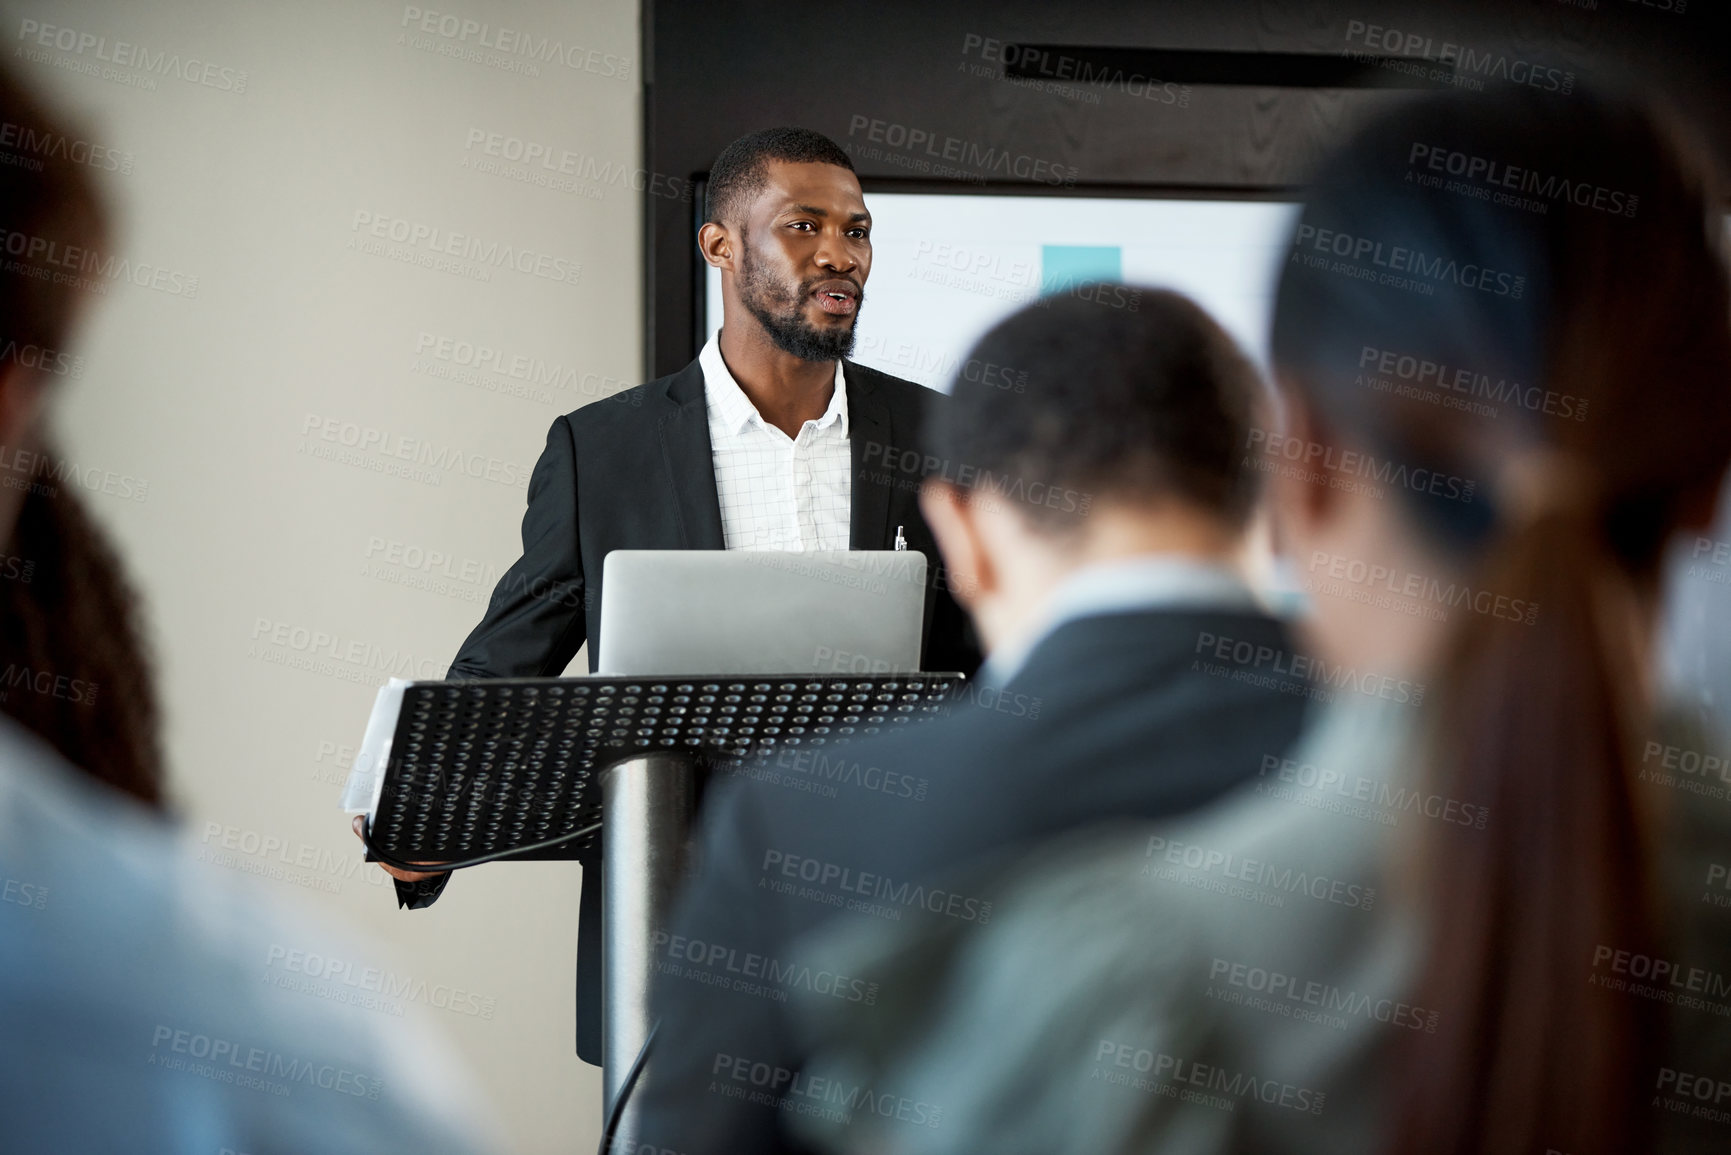 Buy stock photo Shot of a young businessman delivering a presentation during a conference